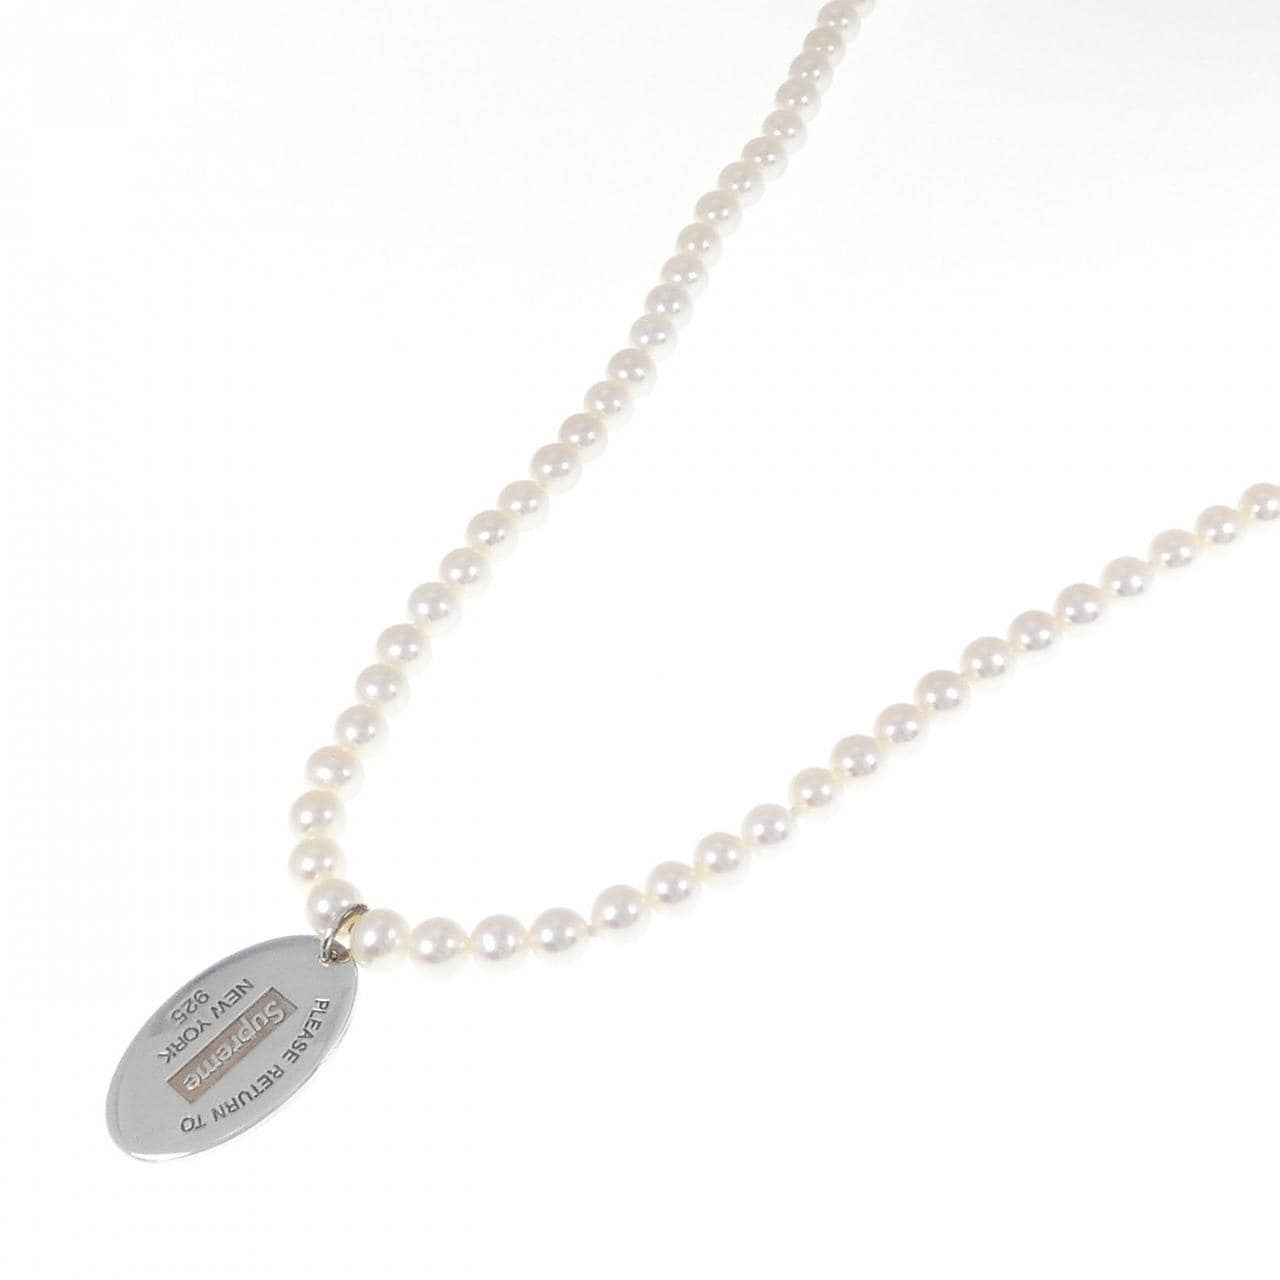 TIFFANY Oval Tag Necklace 5.5-6mm